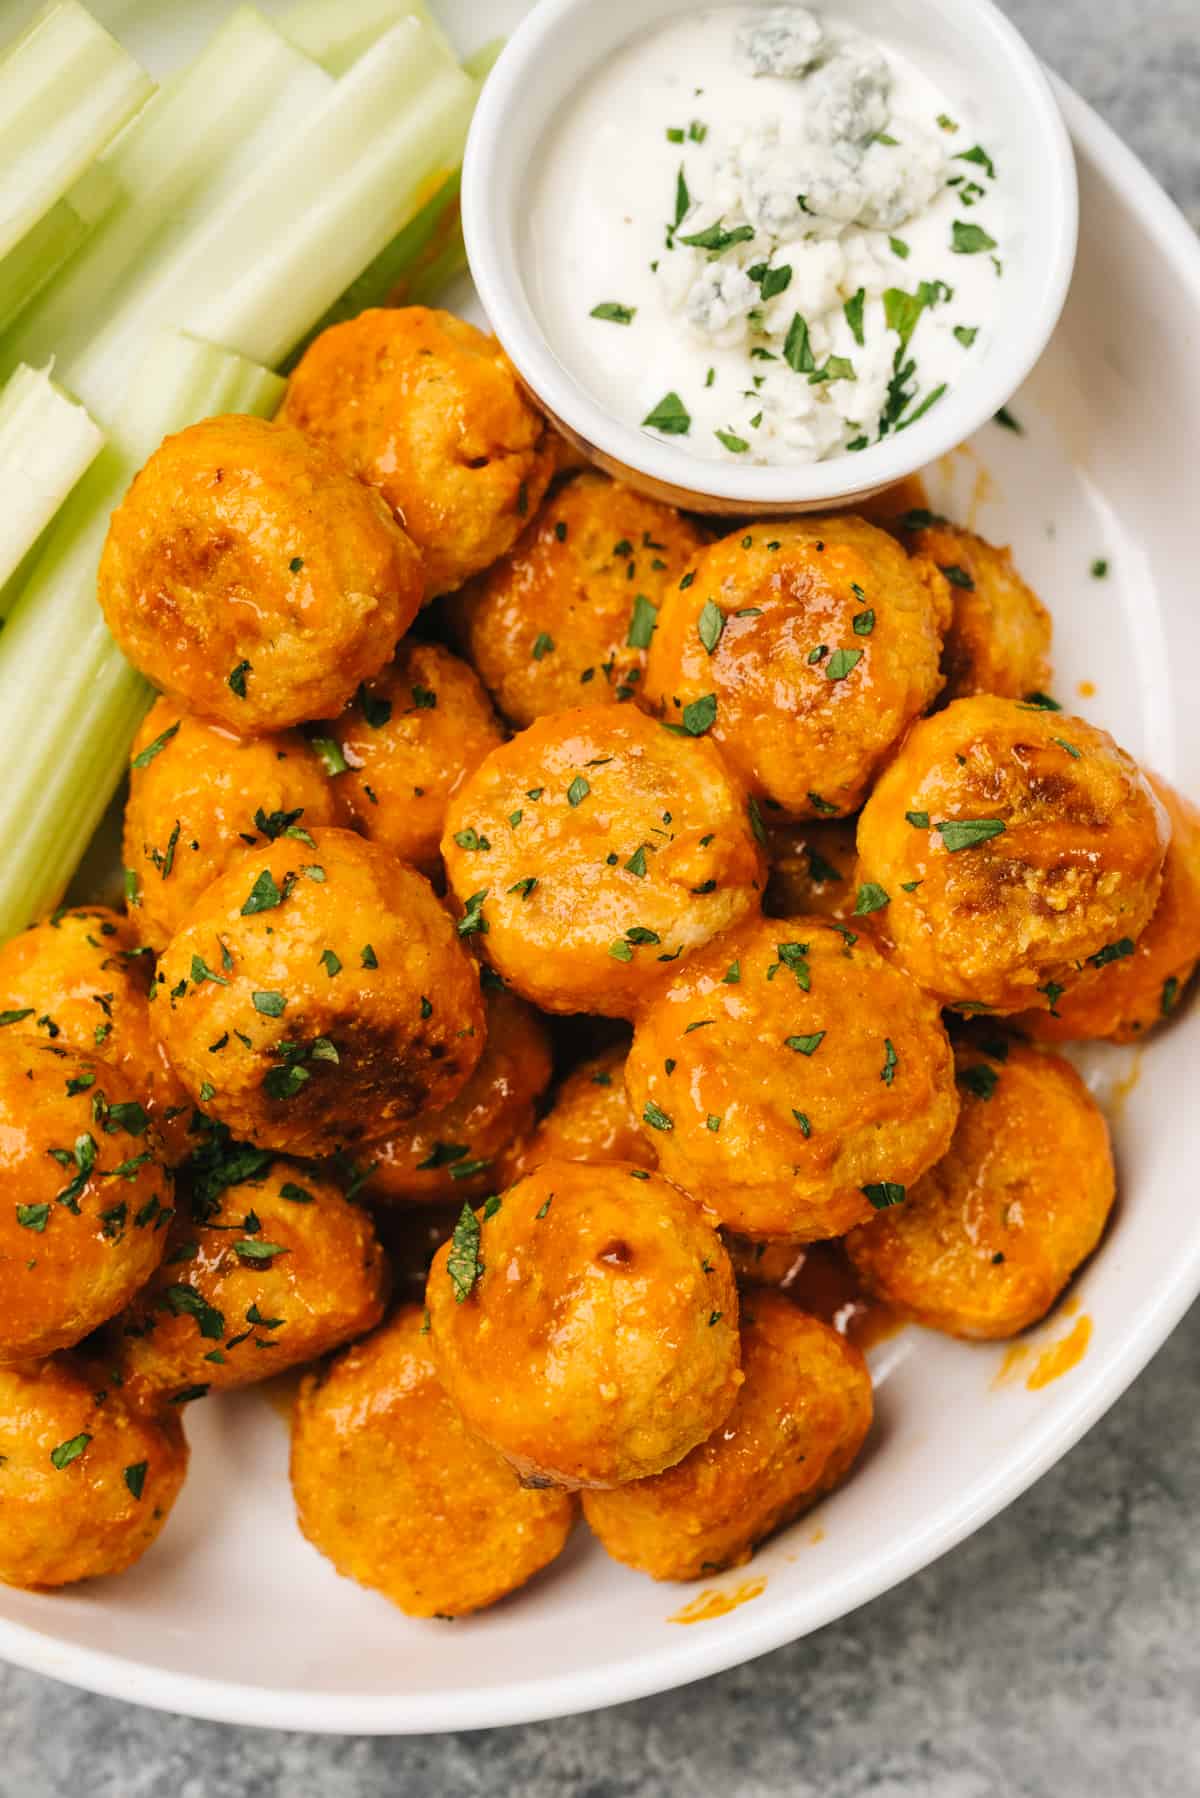 Buffalo chicken meatballs in a large white serving dish with celery sticks and a small dipping bowl of blue cheese dressing.